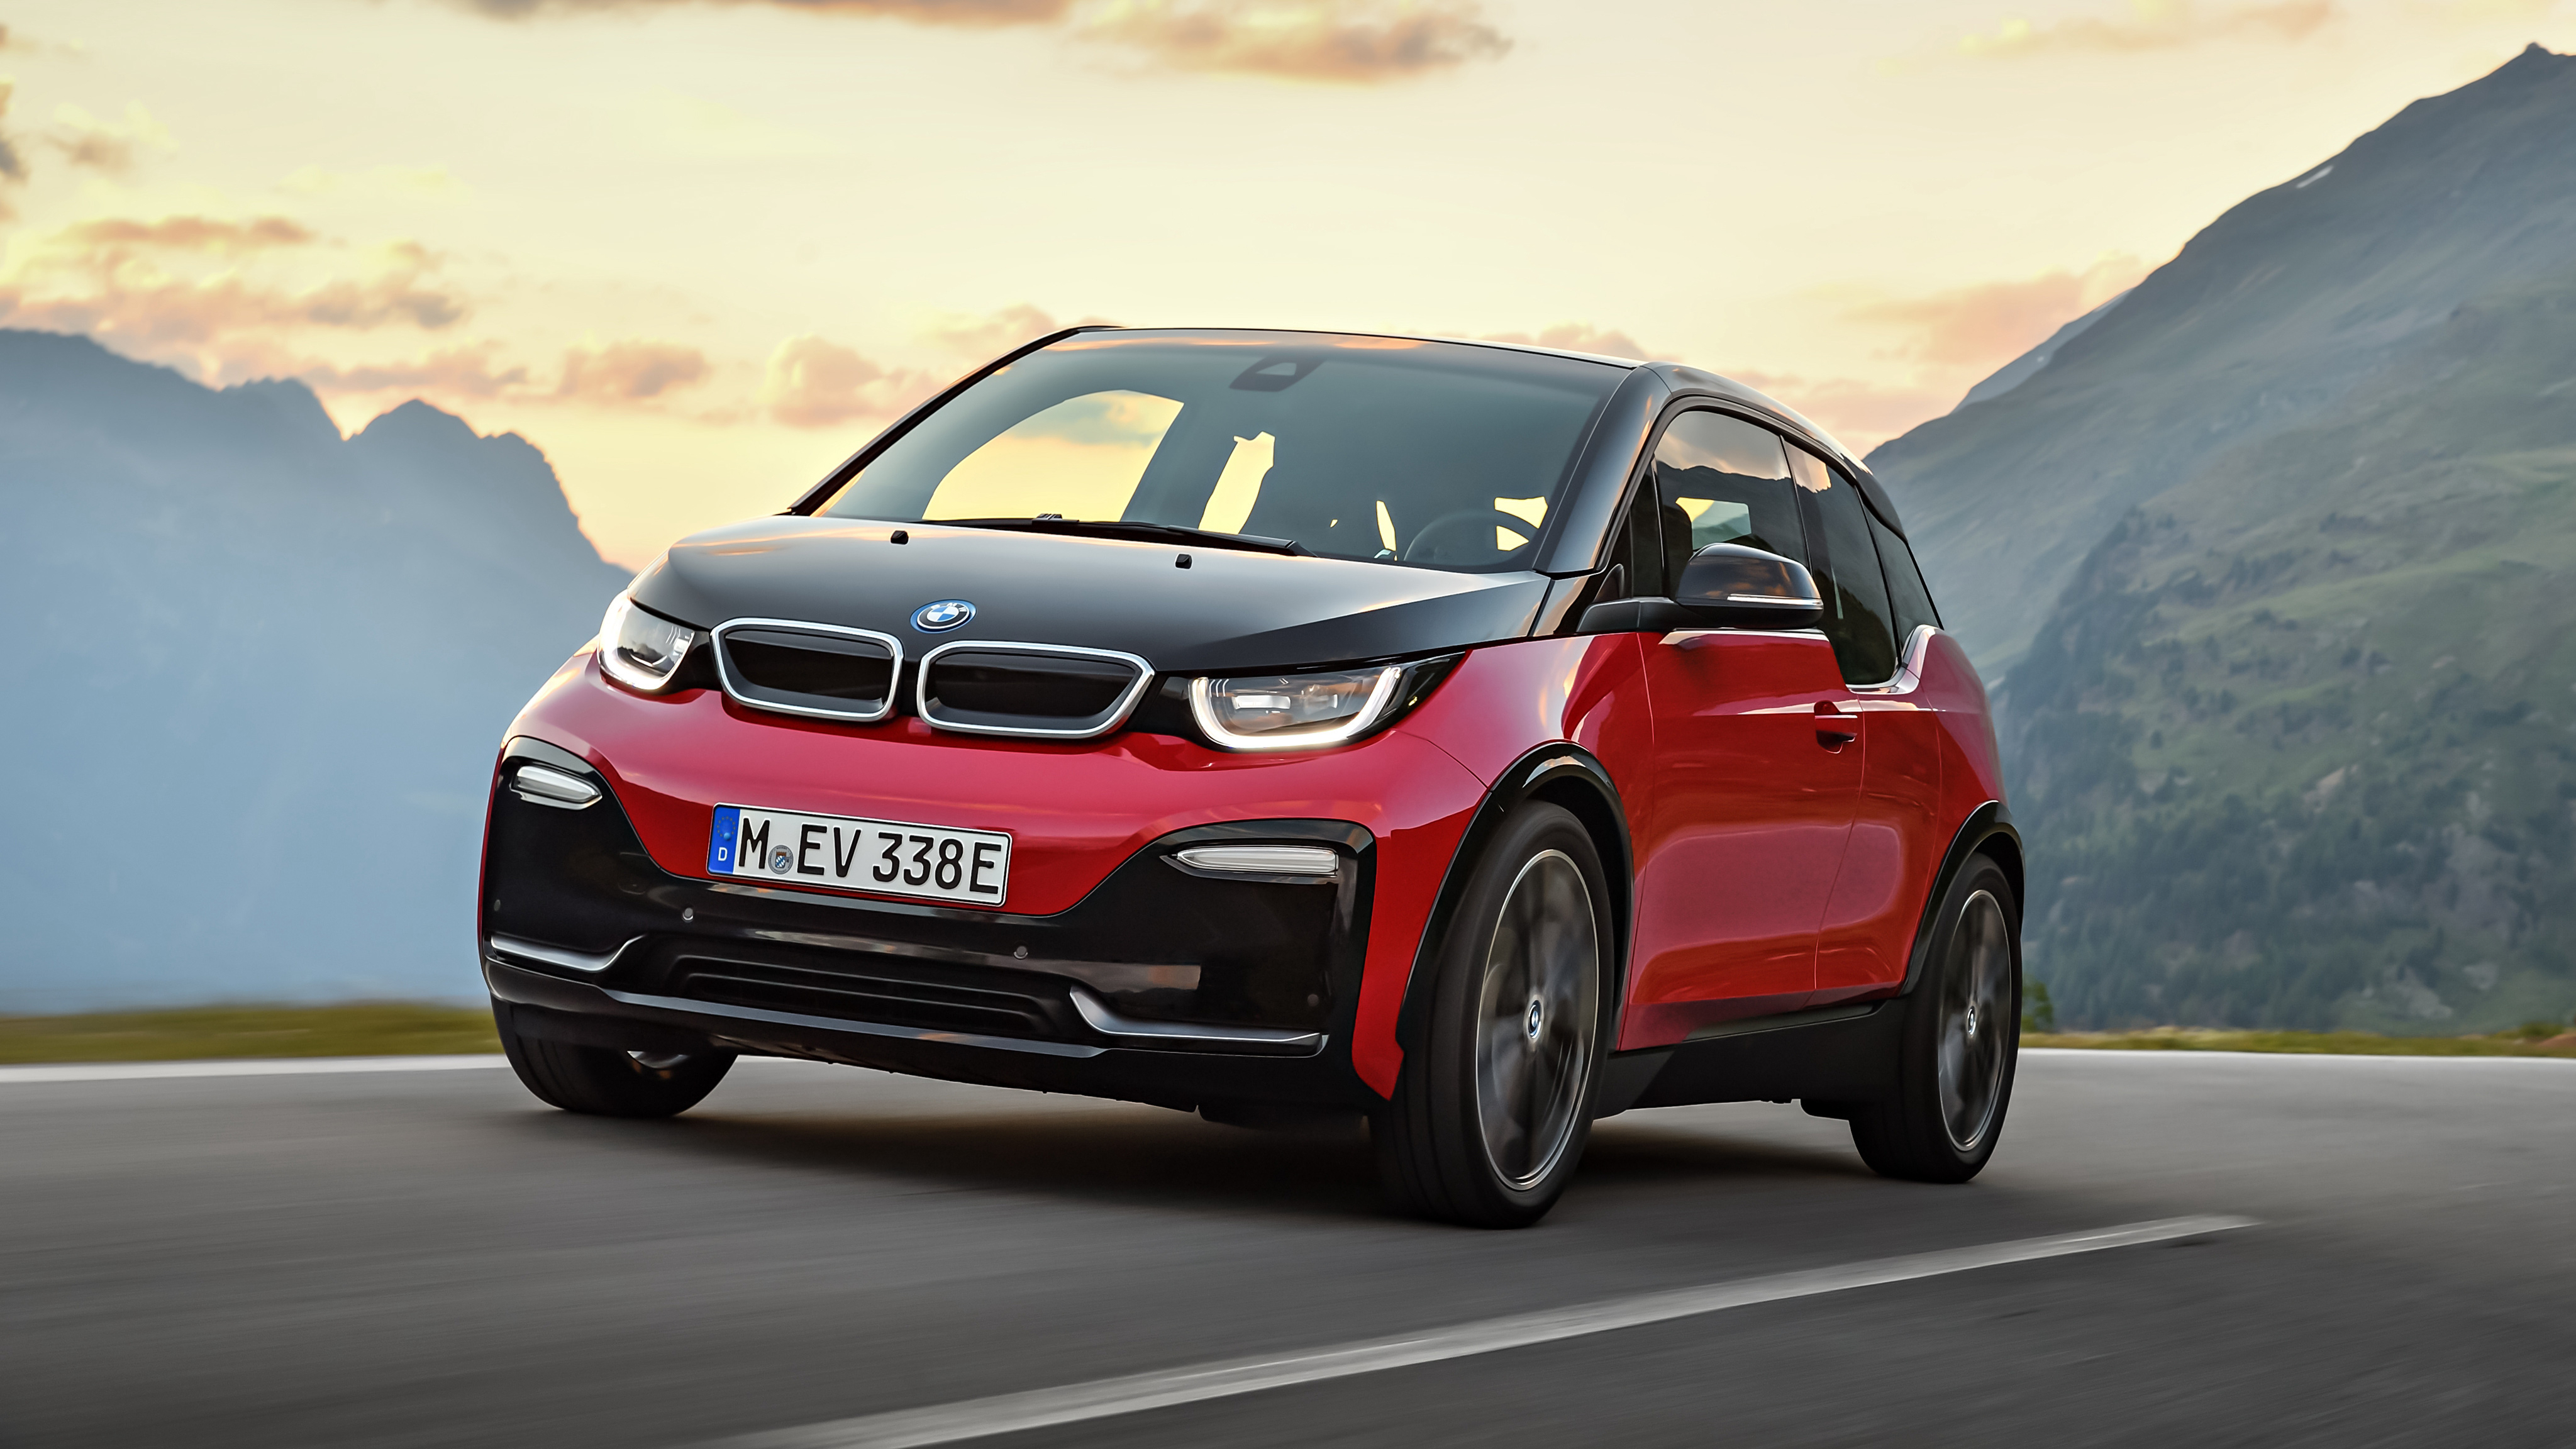 Bmw I3s Background Wallpaper HD Wantingseed